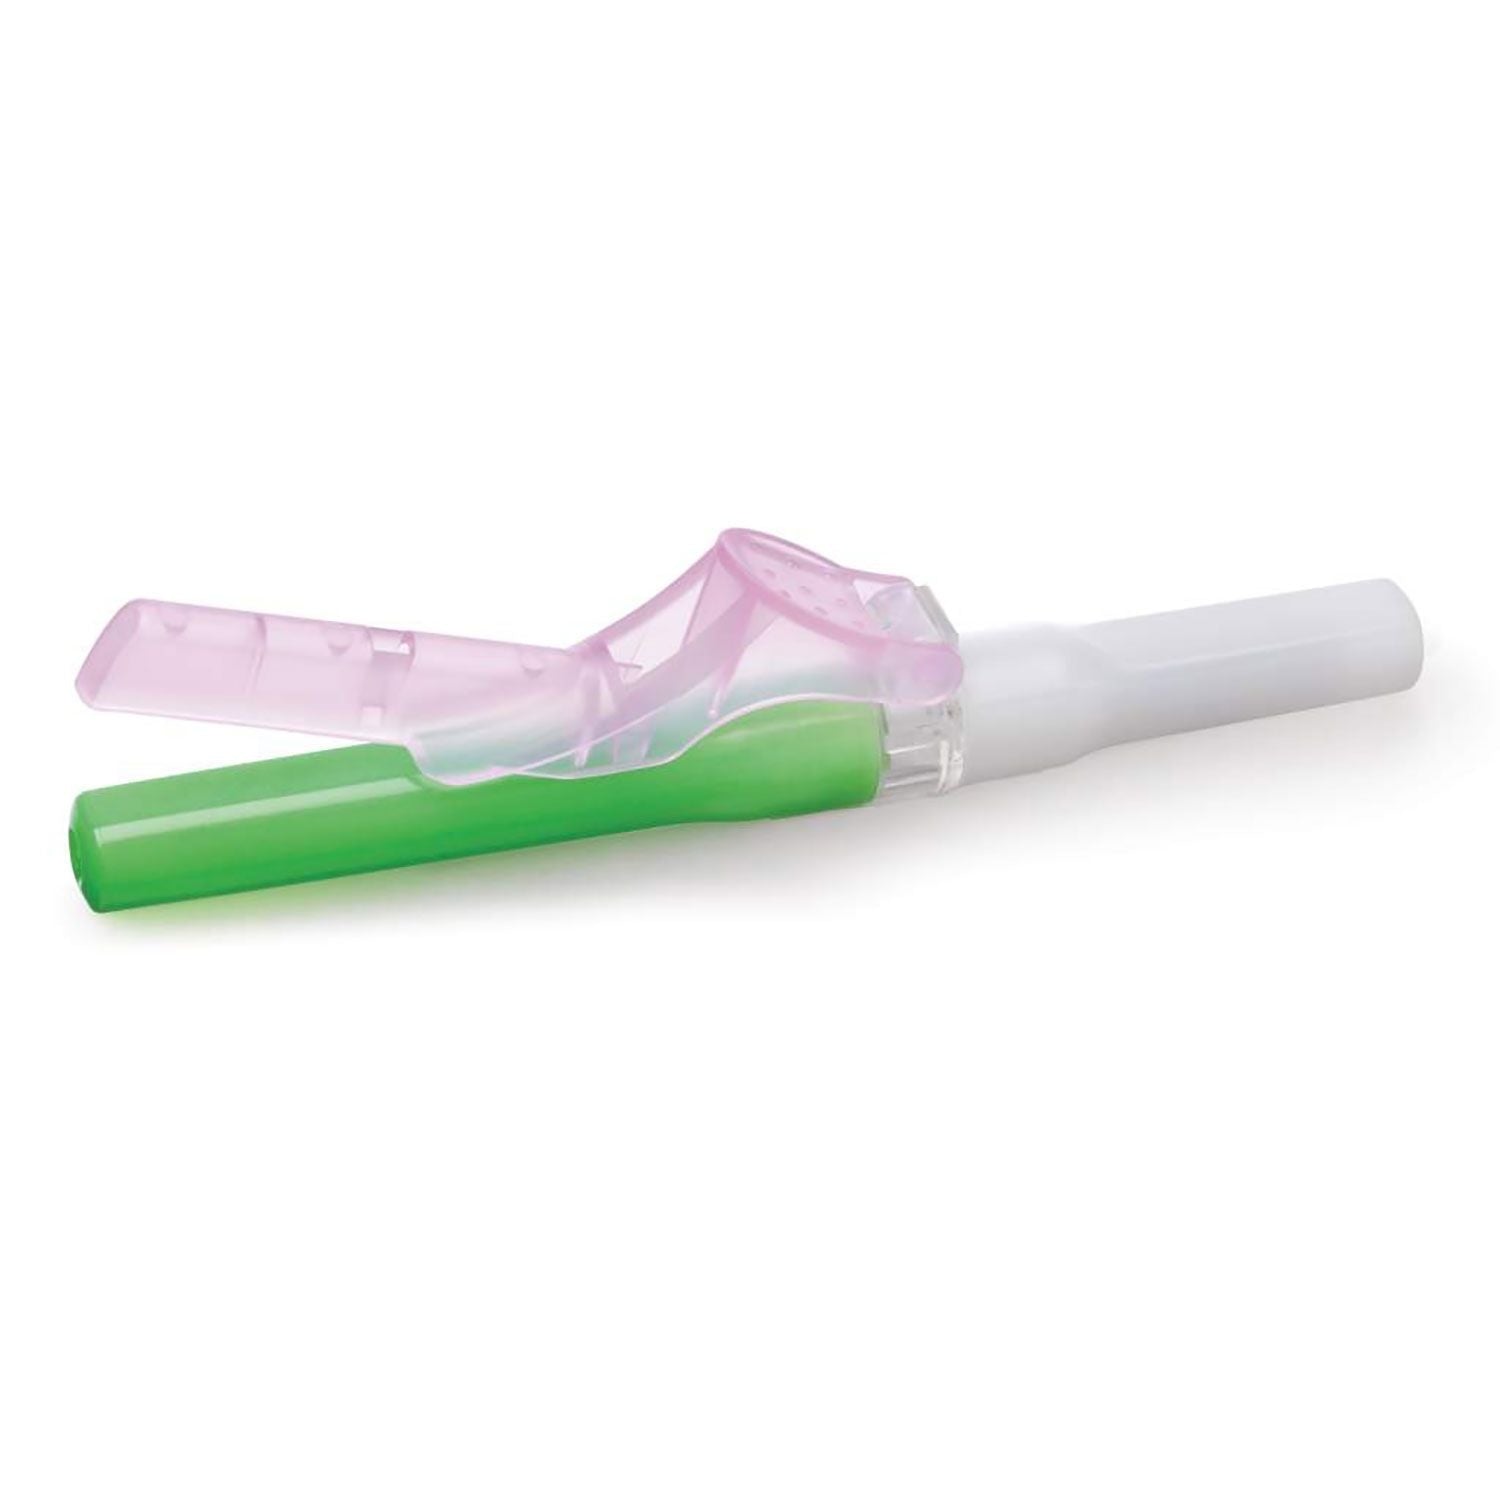 BD Vacutainer Eclipse Safety Blood Collection Needle with Pre-attached Holder | 1.25" | 21G x Green | Pack of 100